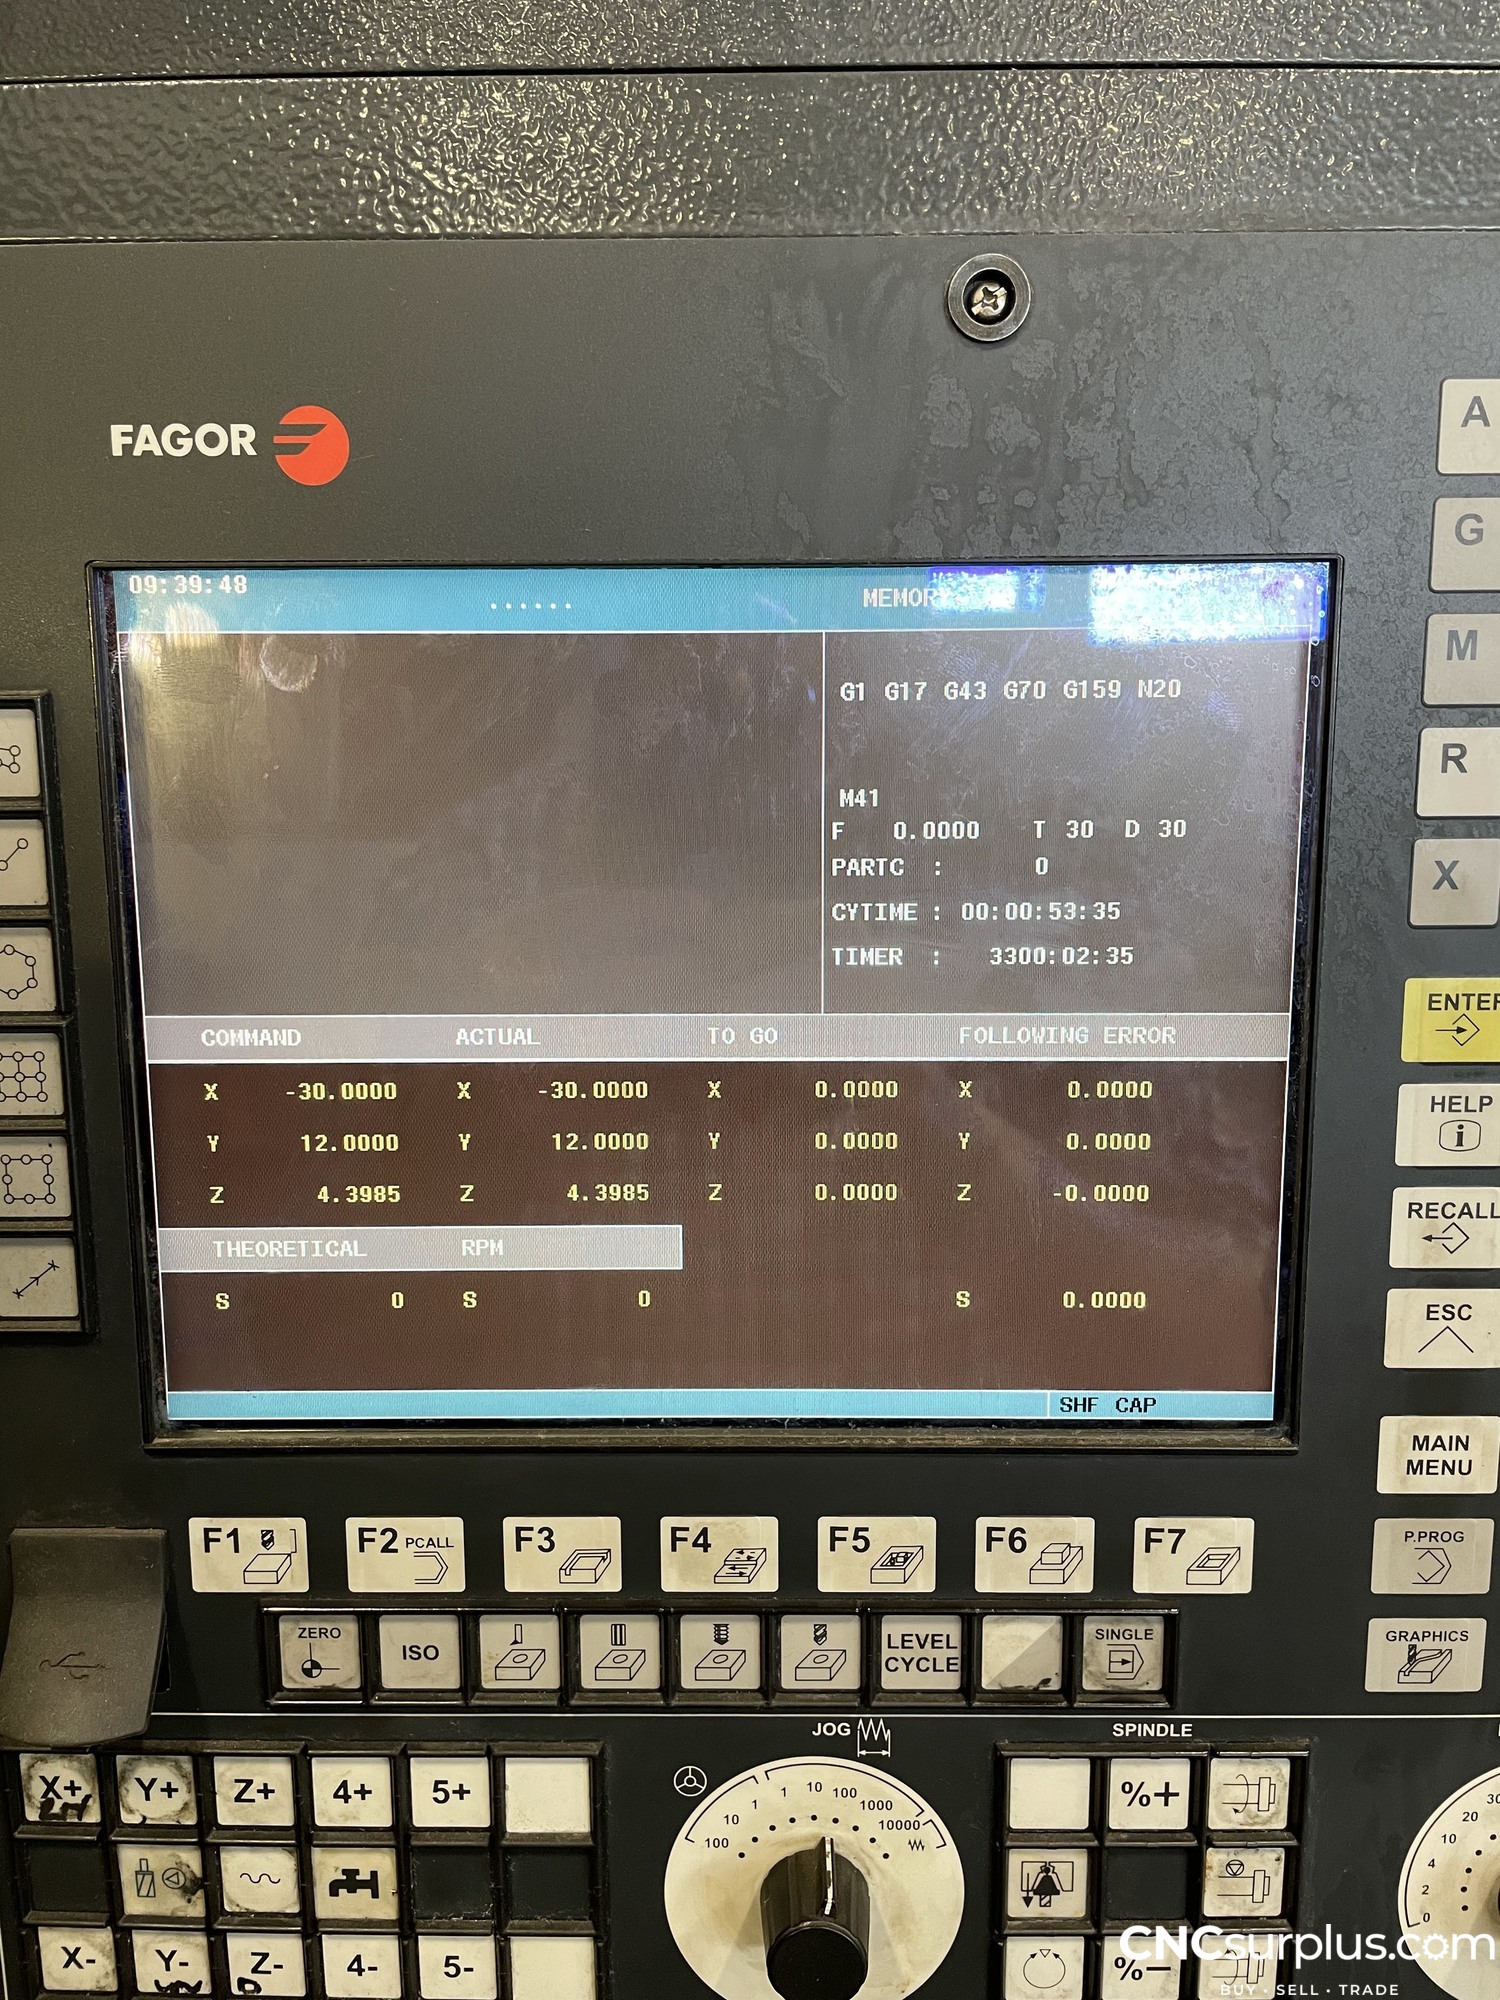 2013 LEADWELL V-60I Vertical Machining Centers | CNCsurplus, A Div. of Comtex Leasing Corp.